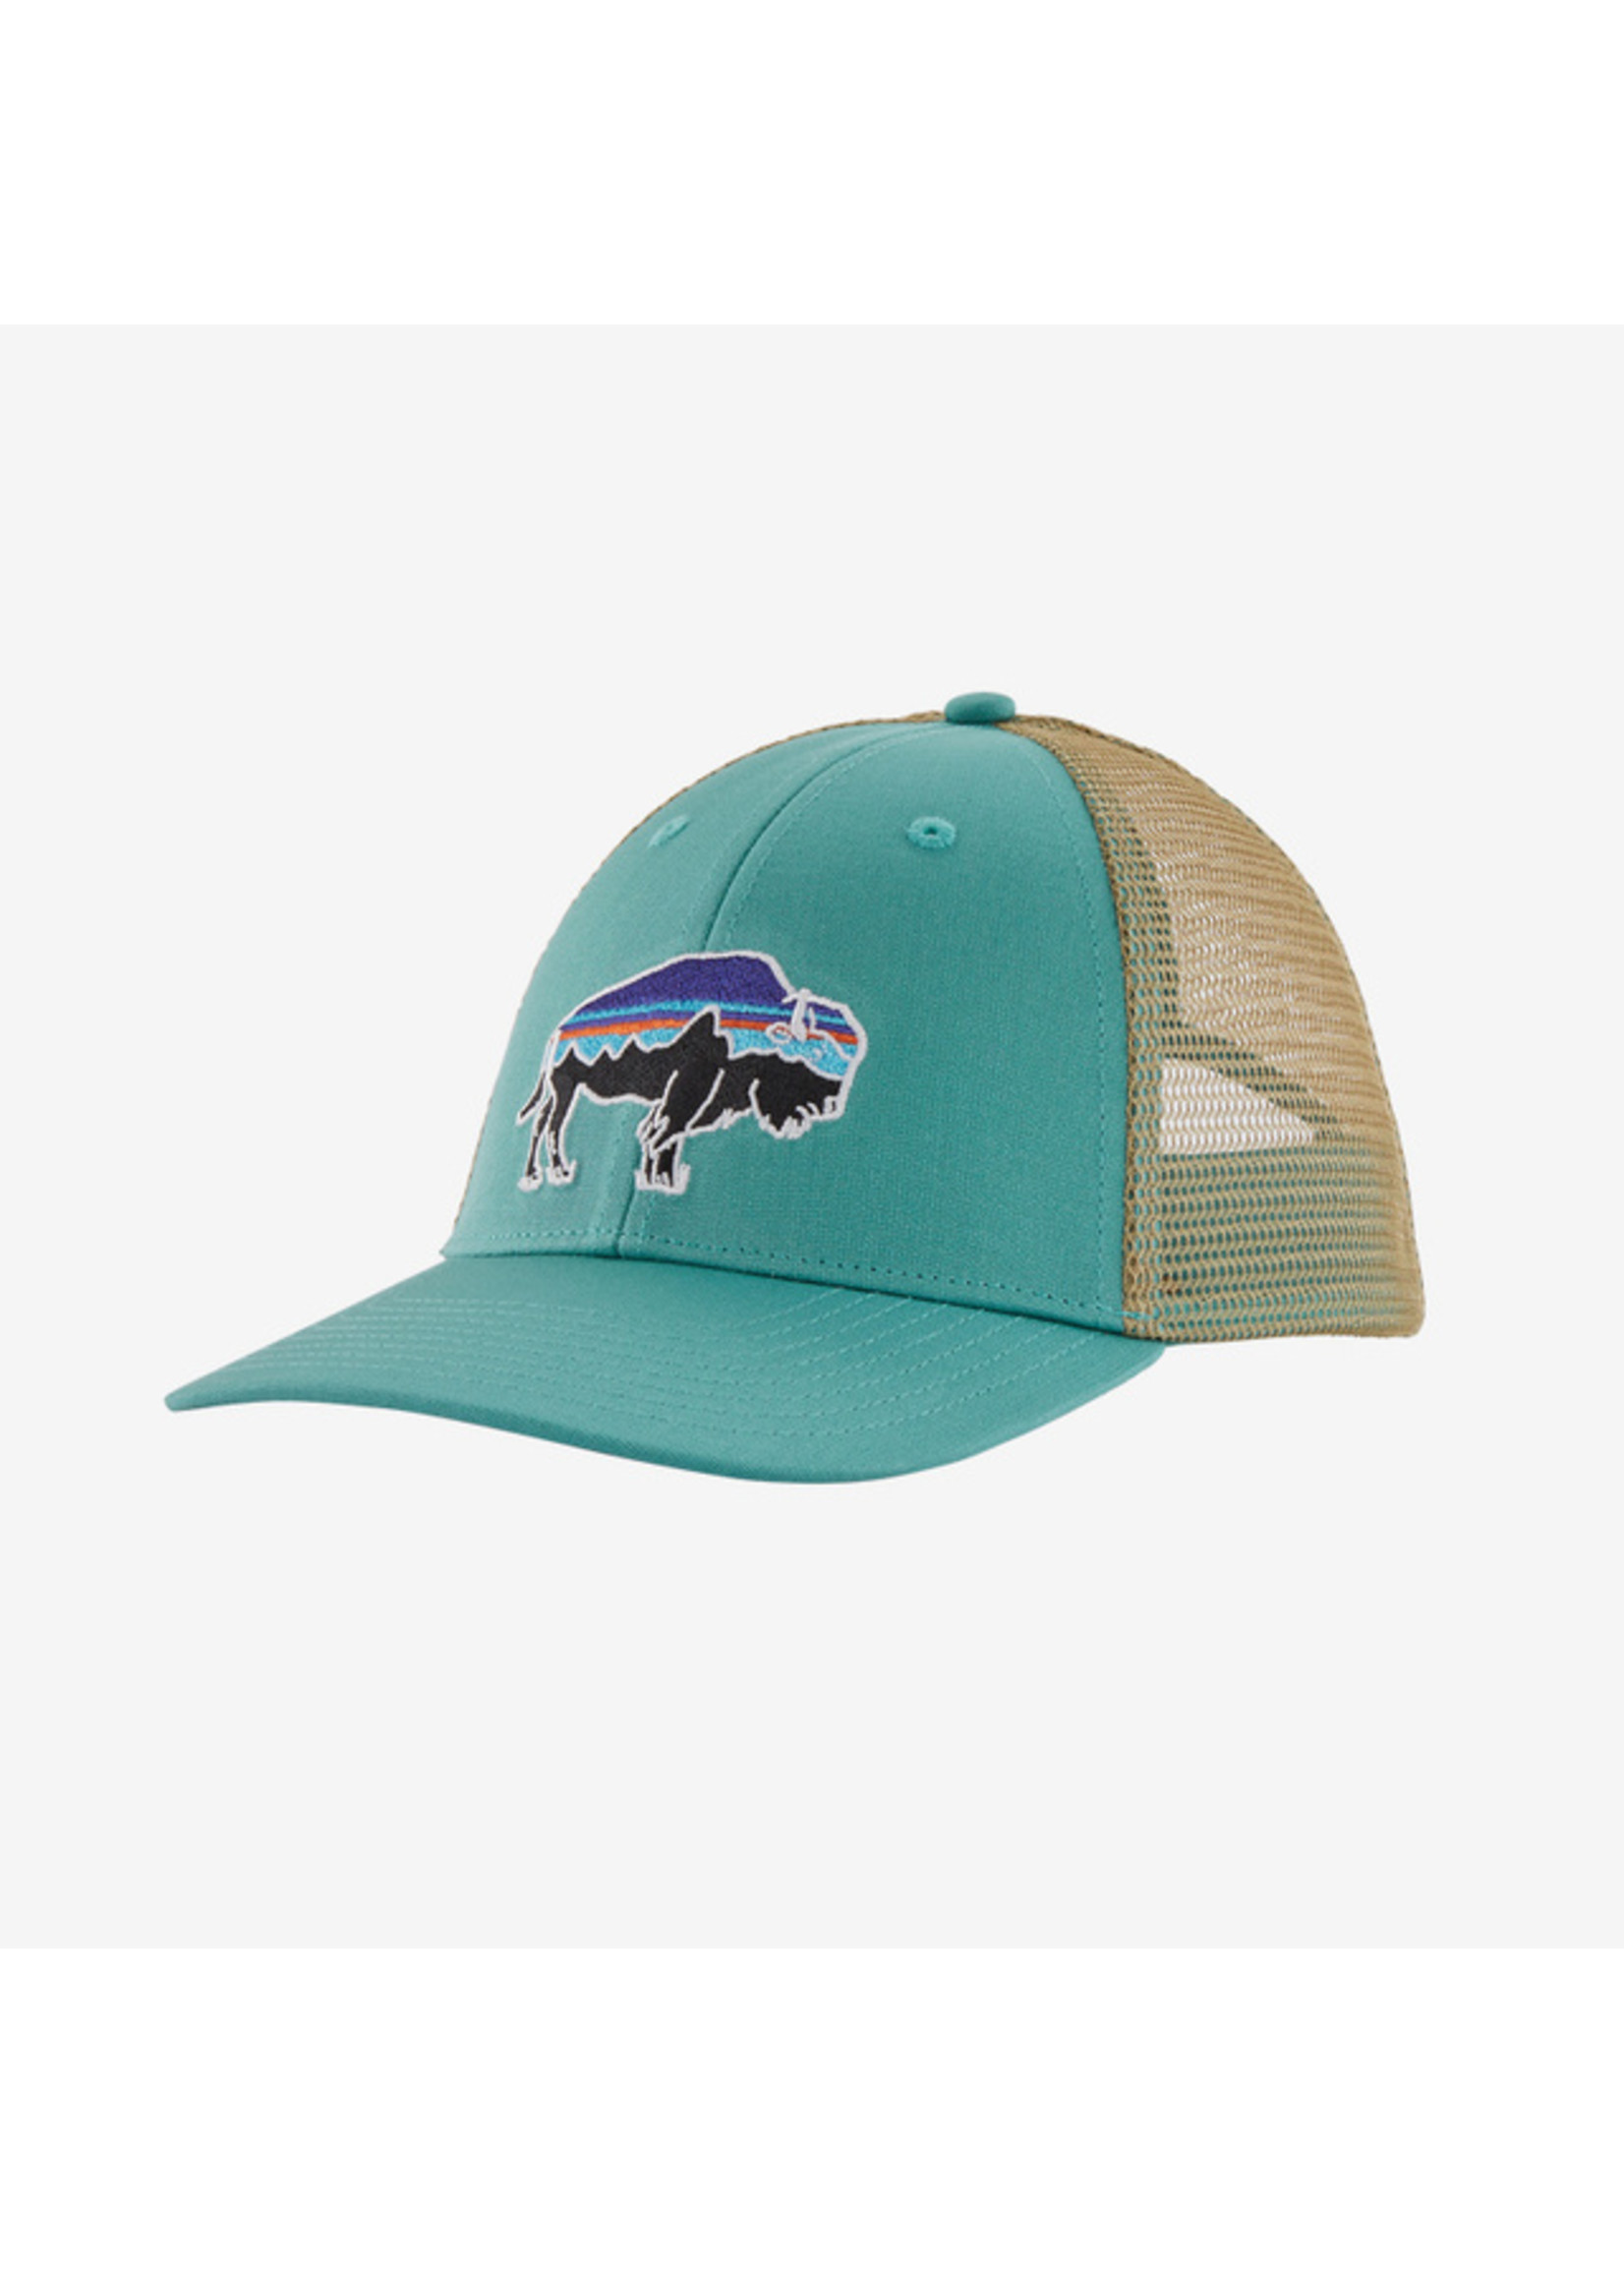 Patagonia Fitz Roy Bison LoPro Trucker Hat - Sweetwater Fly Shop